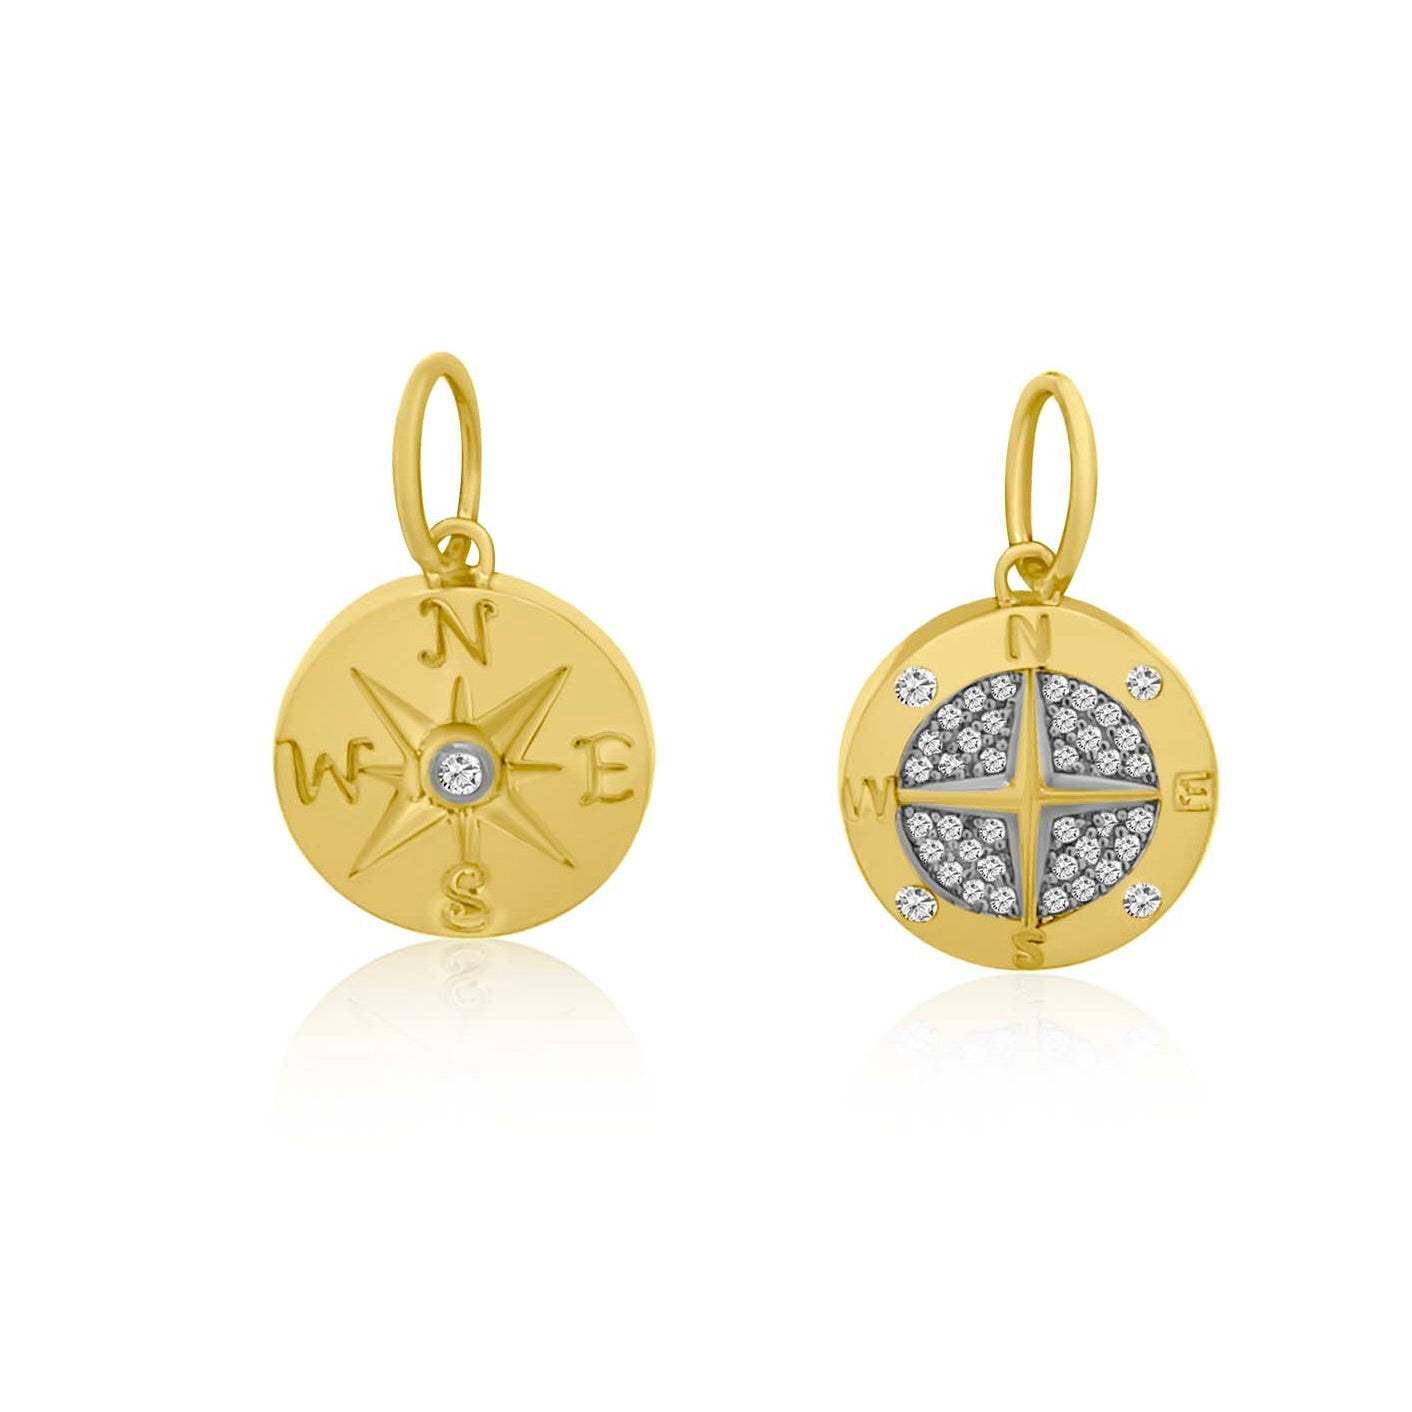 Two Sided Gold and Diamond Directional Charm